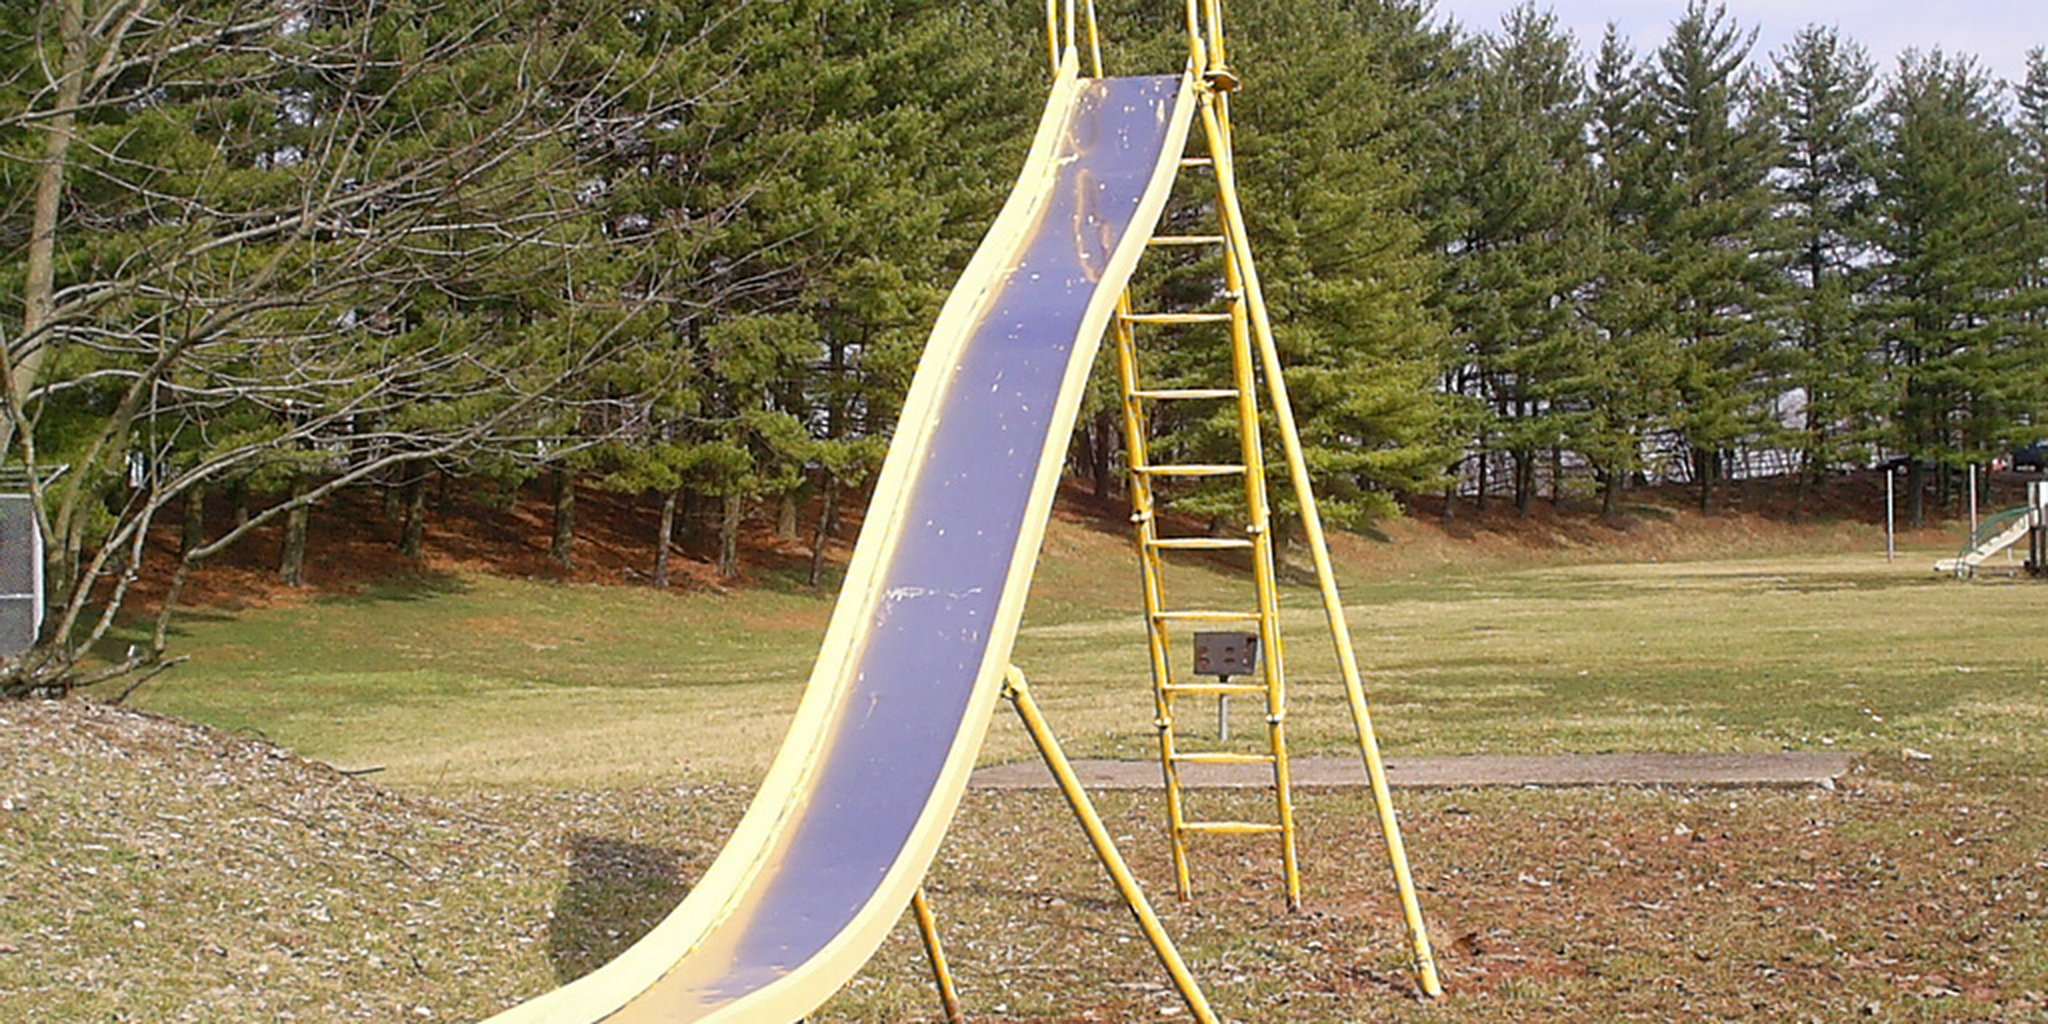 The most dangerous playground slide in the world | The Daily Dot